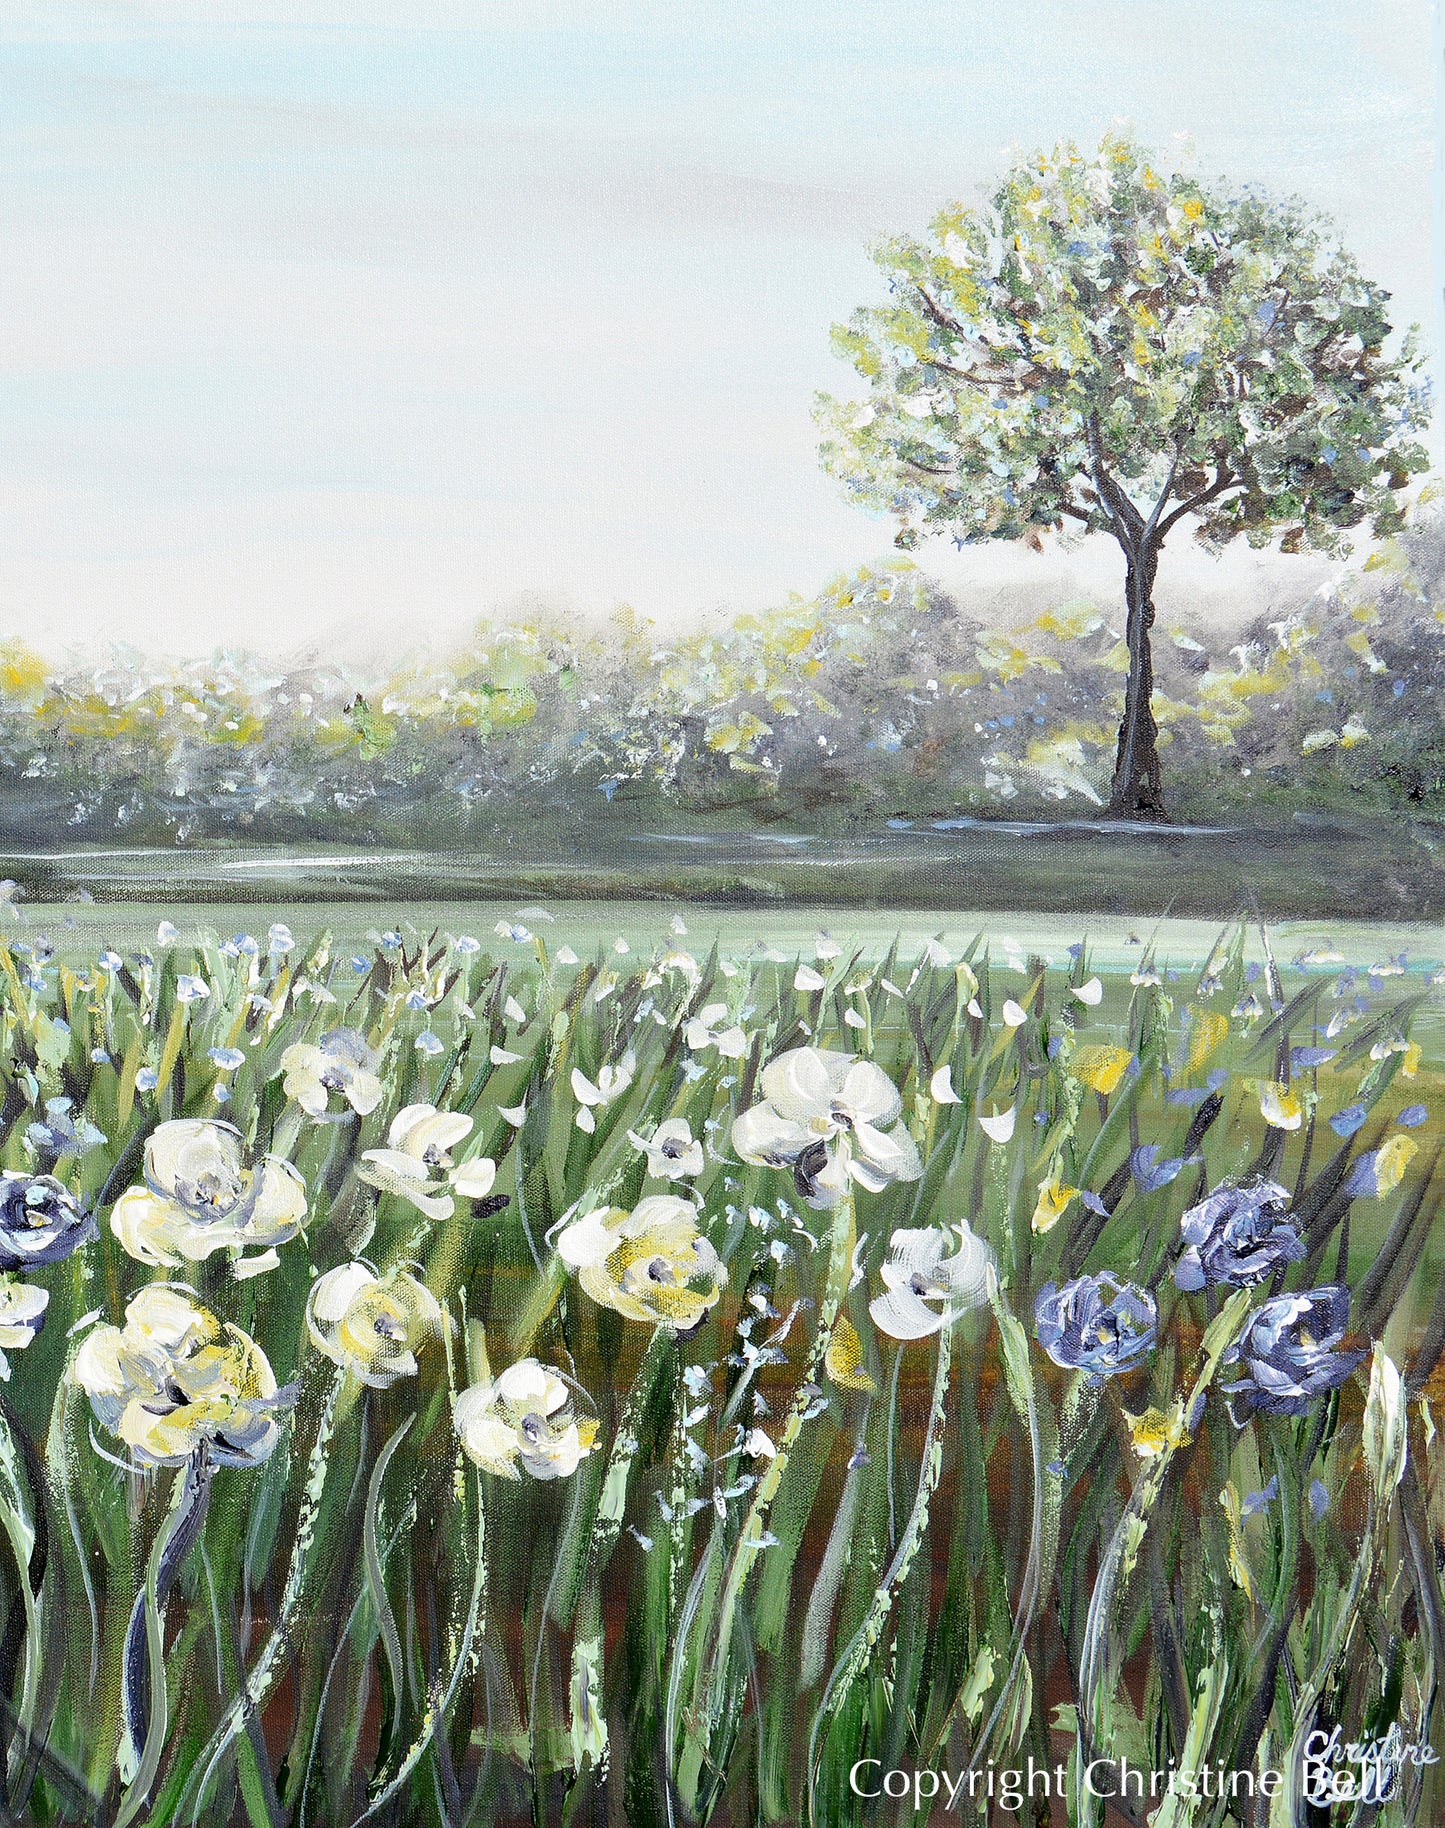 "A Place of Peace II" GICLEE PRINT Art Floral Landscape Painting Green Blue White Flowers Meadow Tree Vertical Wall Art